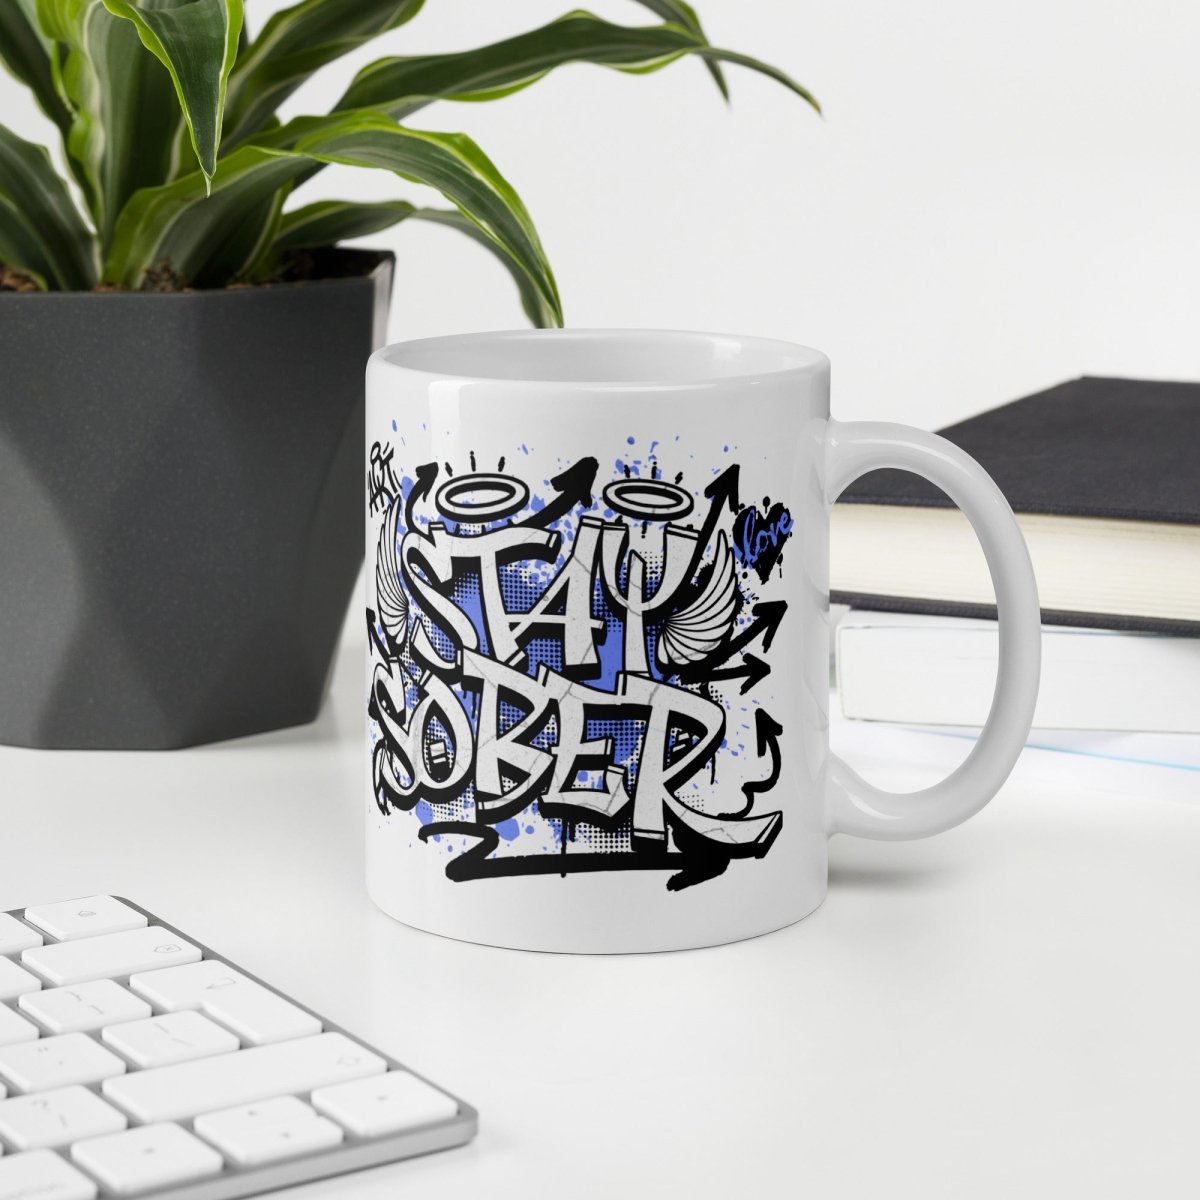 Empowering Stay Sober Coffee Mug: A Rebellious Reminder of Your Sobriety Journey - | Sobervation